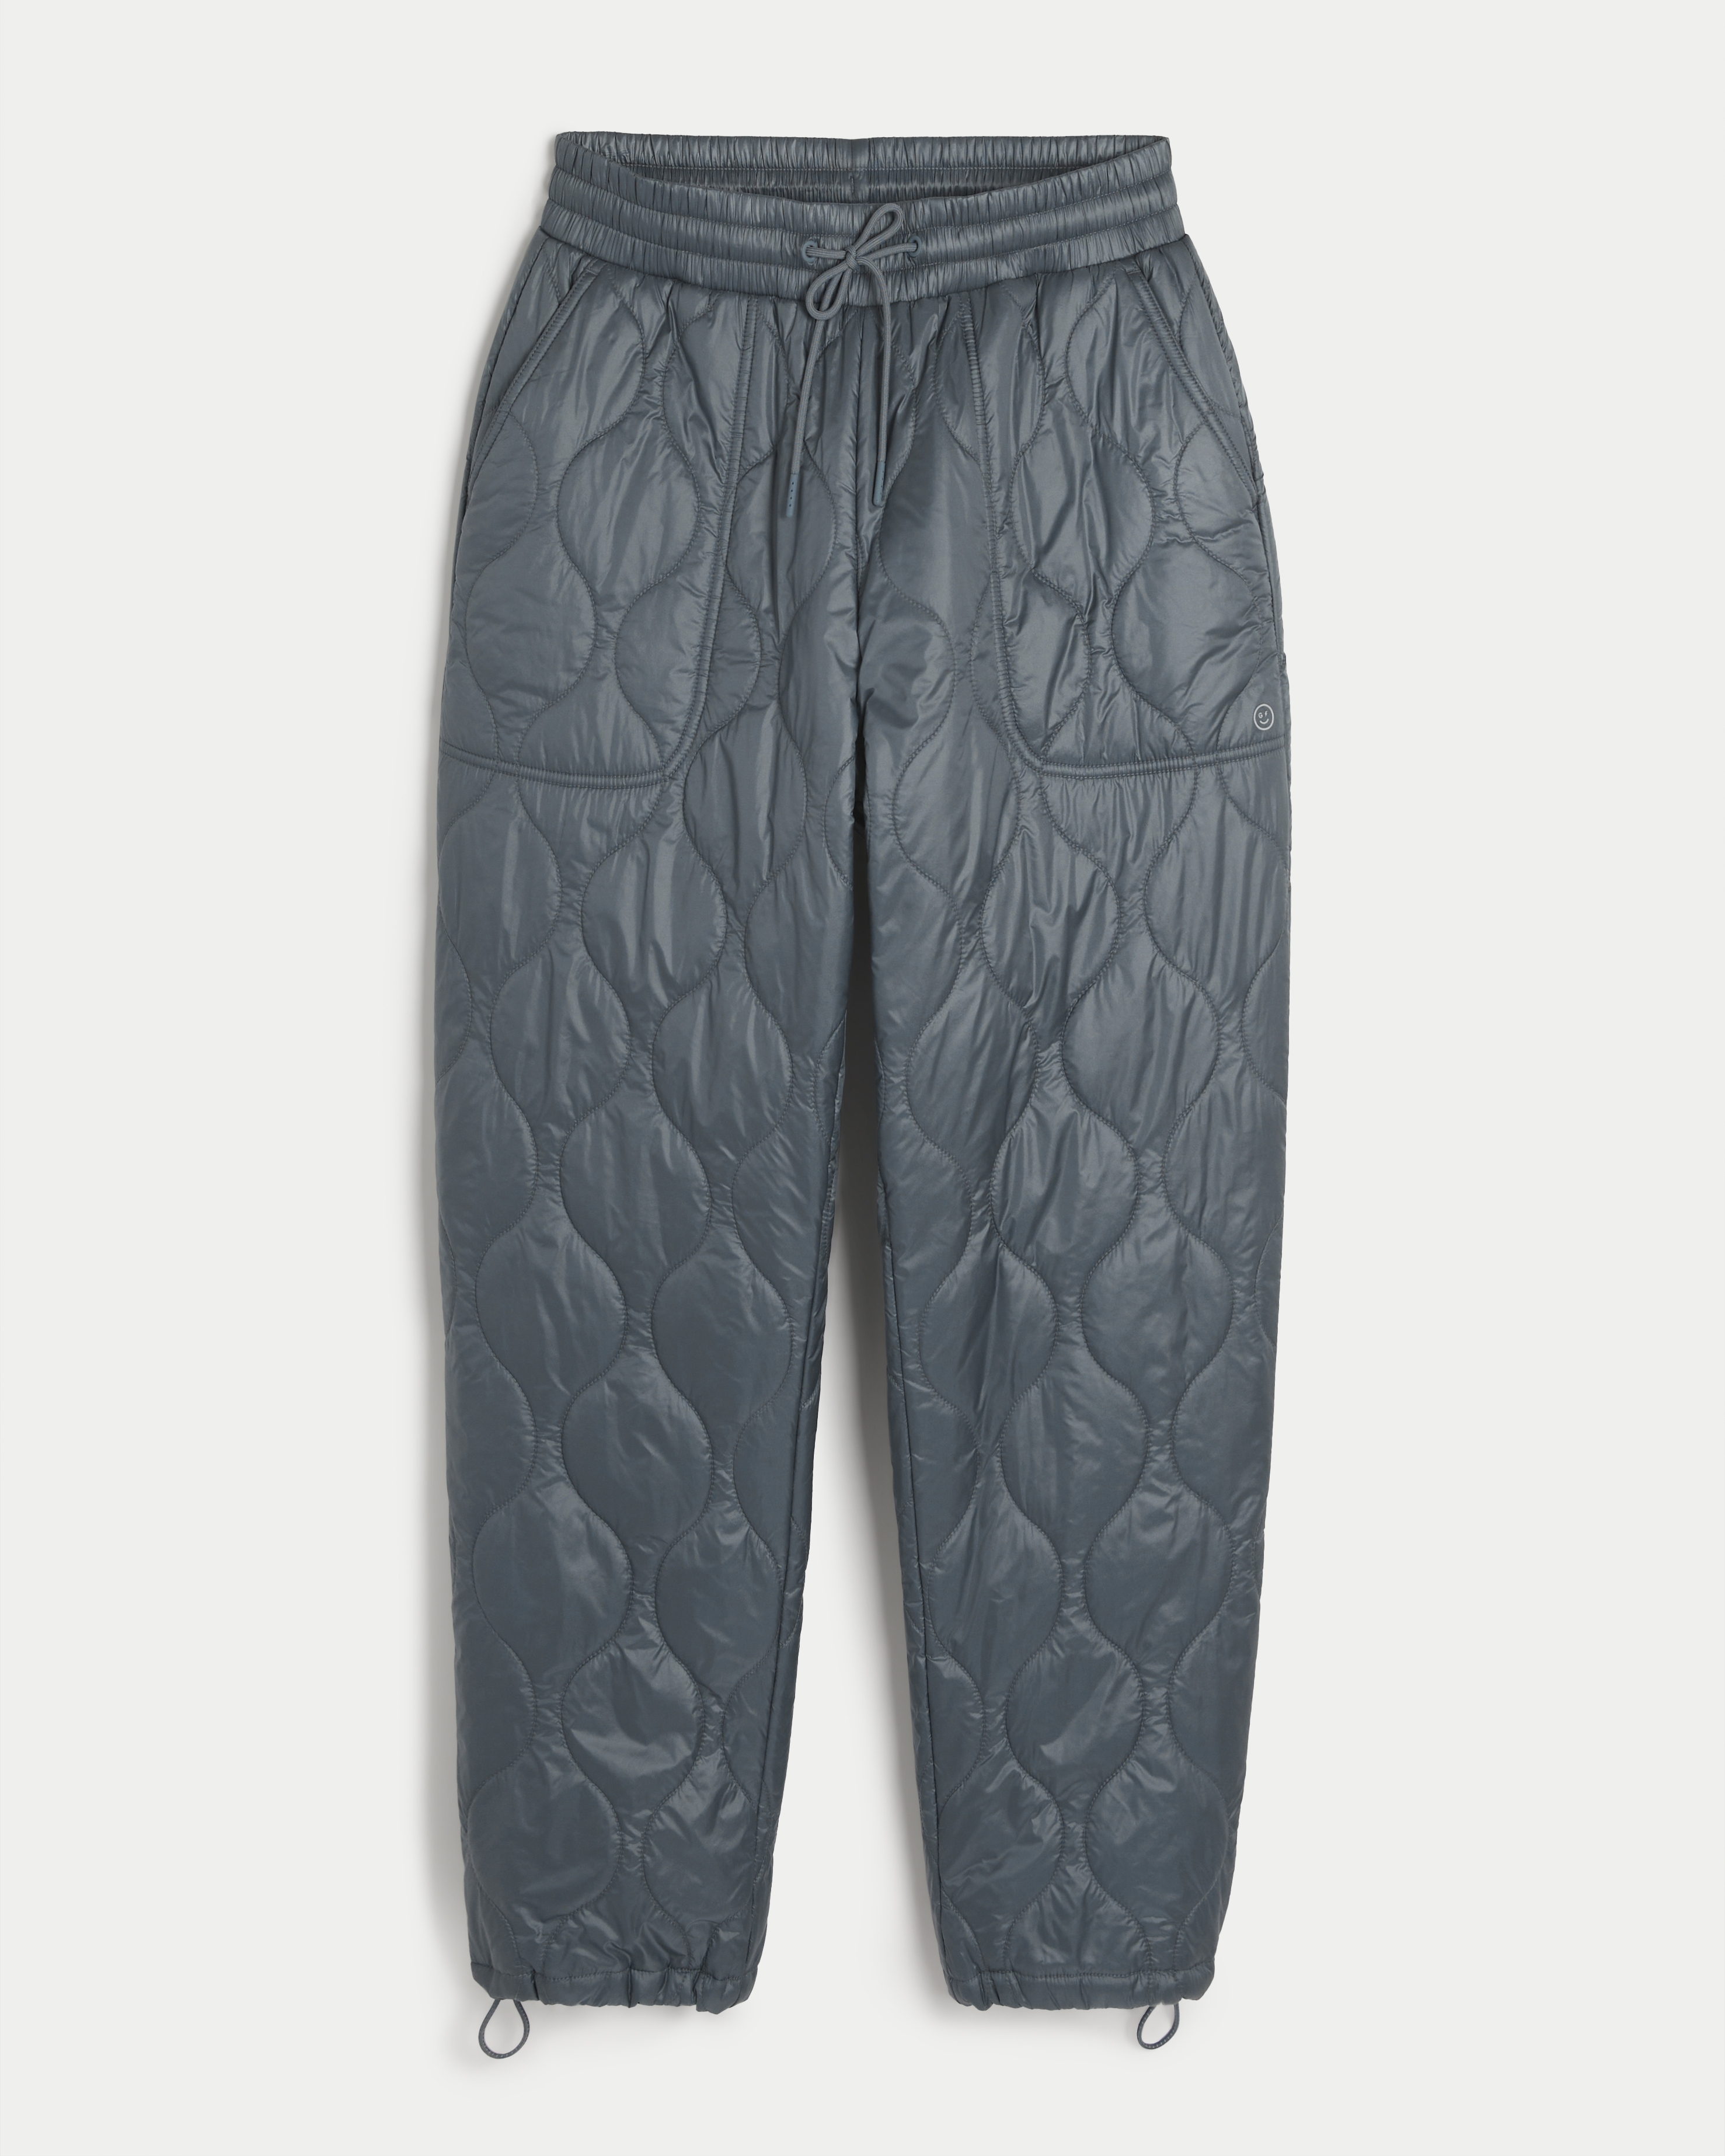 Women's Gilly Hicks Active Quilted Puffer Pants - Hollister Co.